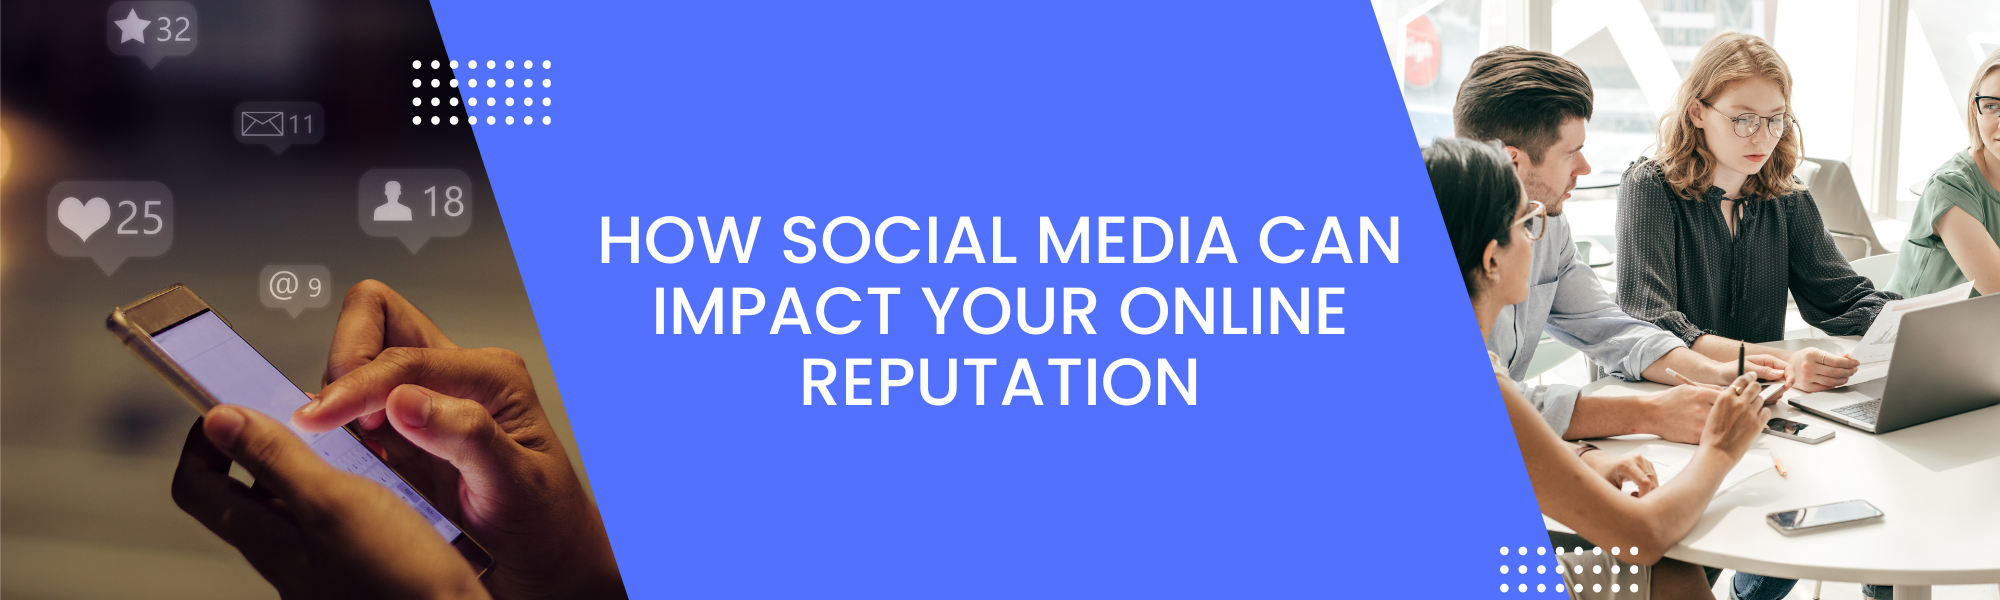 How Social Media Can Impact Your Online Reputation